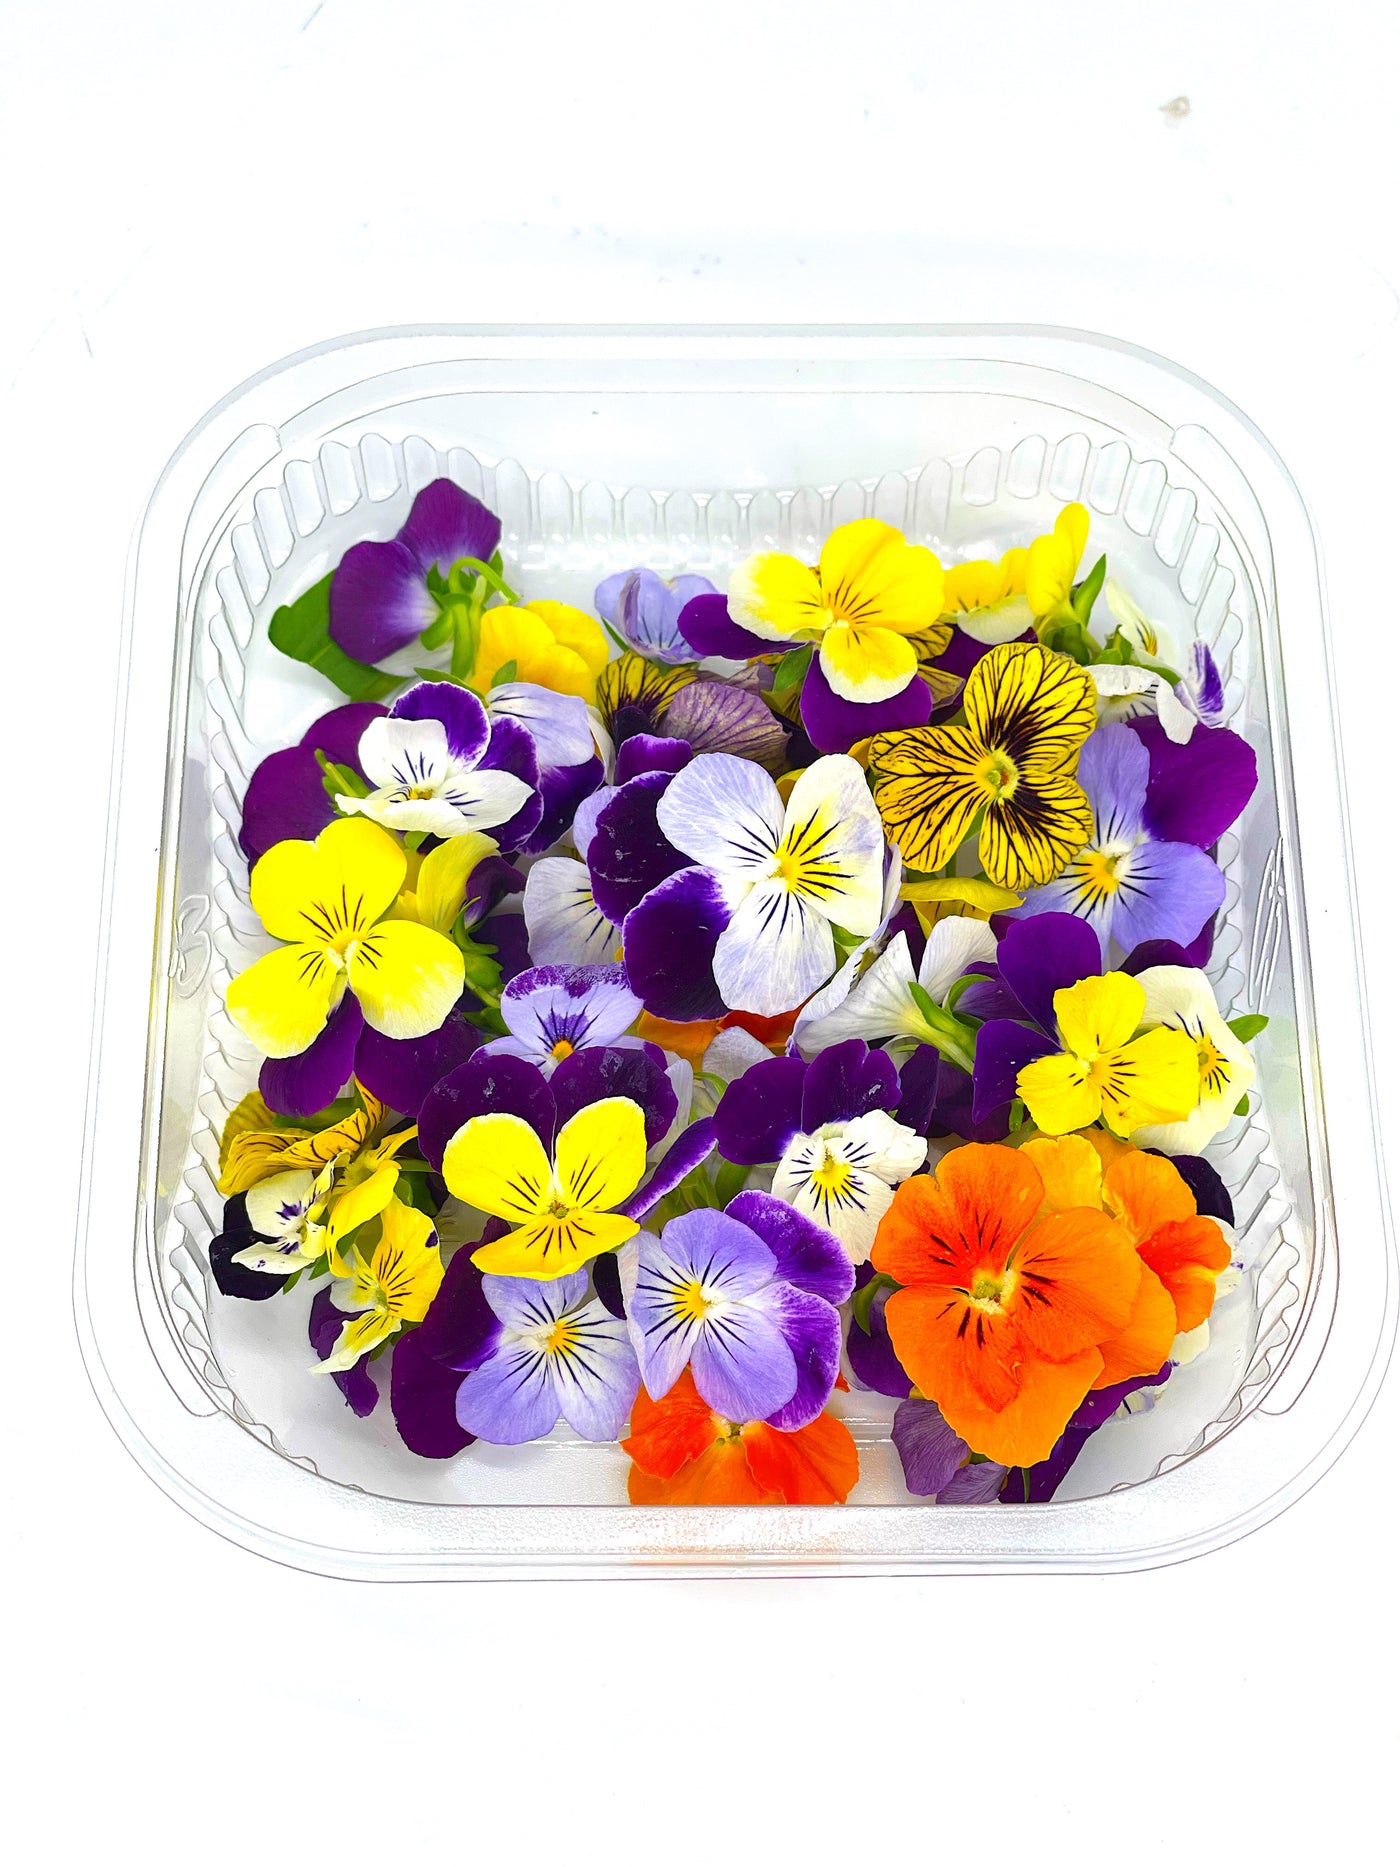 10 Edible Flowers to Beautify Your Plate - One Green Planet